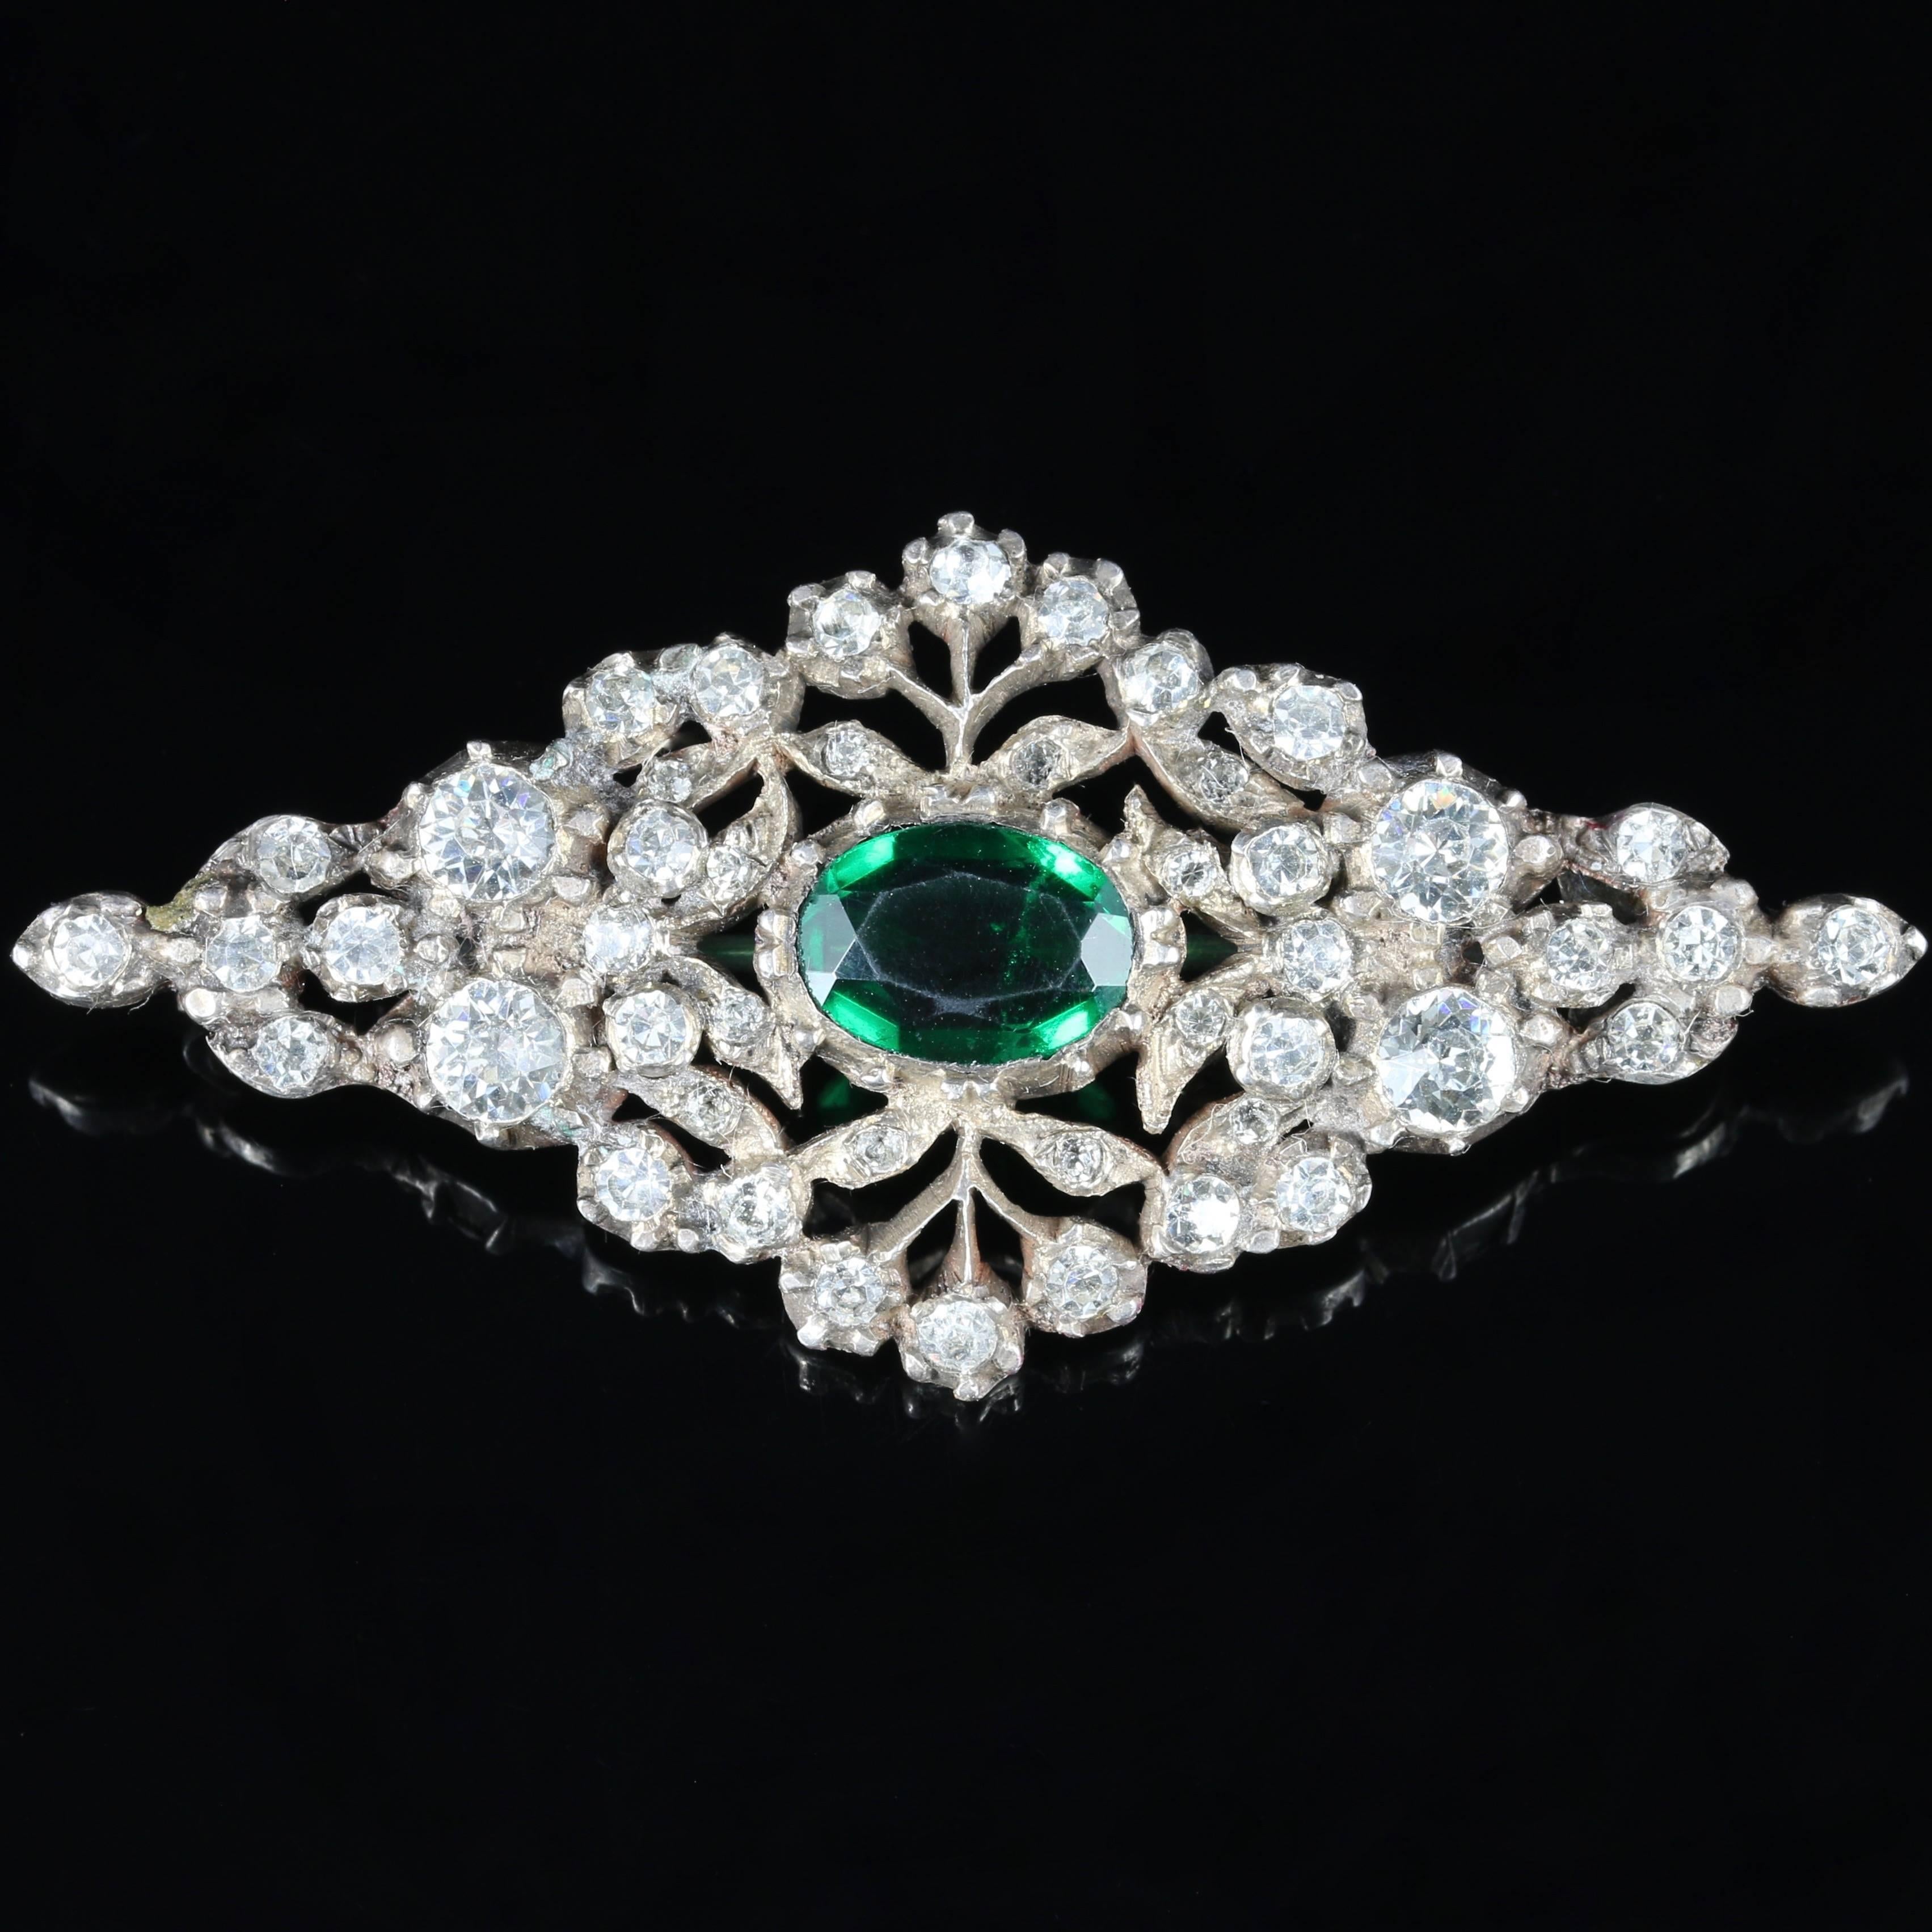 This beautiful  brooch  set with lovely bright white Paste stones which are foiled backed and a large green Paste stone in the centre.

All set in Sterling Silver.

The central green Paste stone is 3.80ct in size.

A Victorian safety catch has been